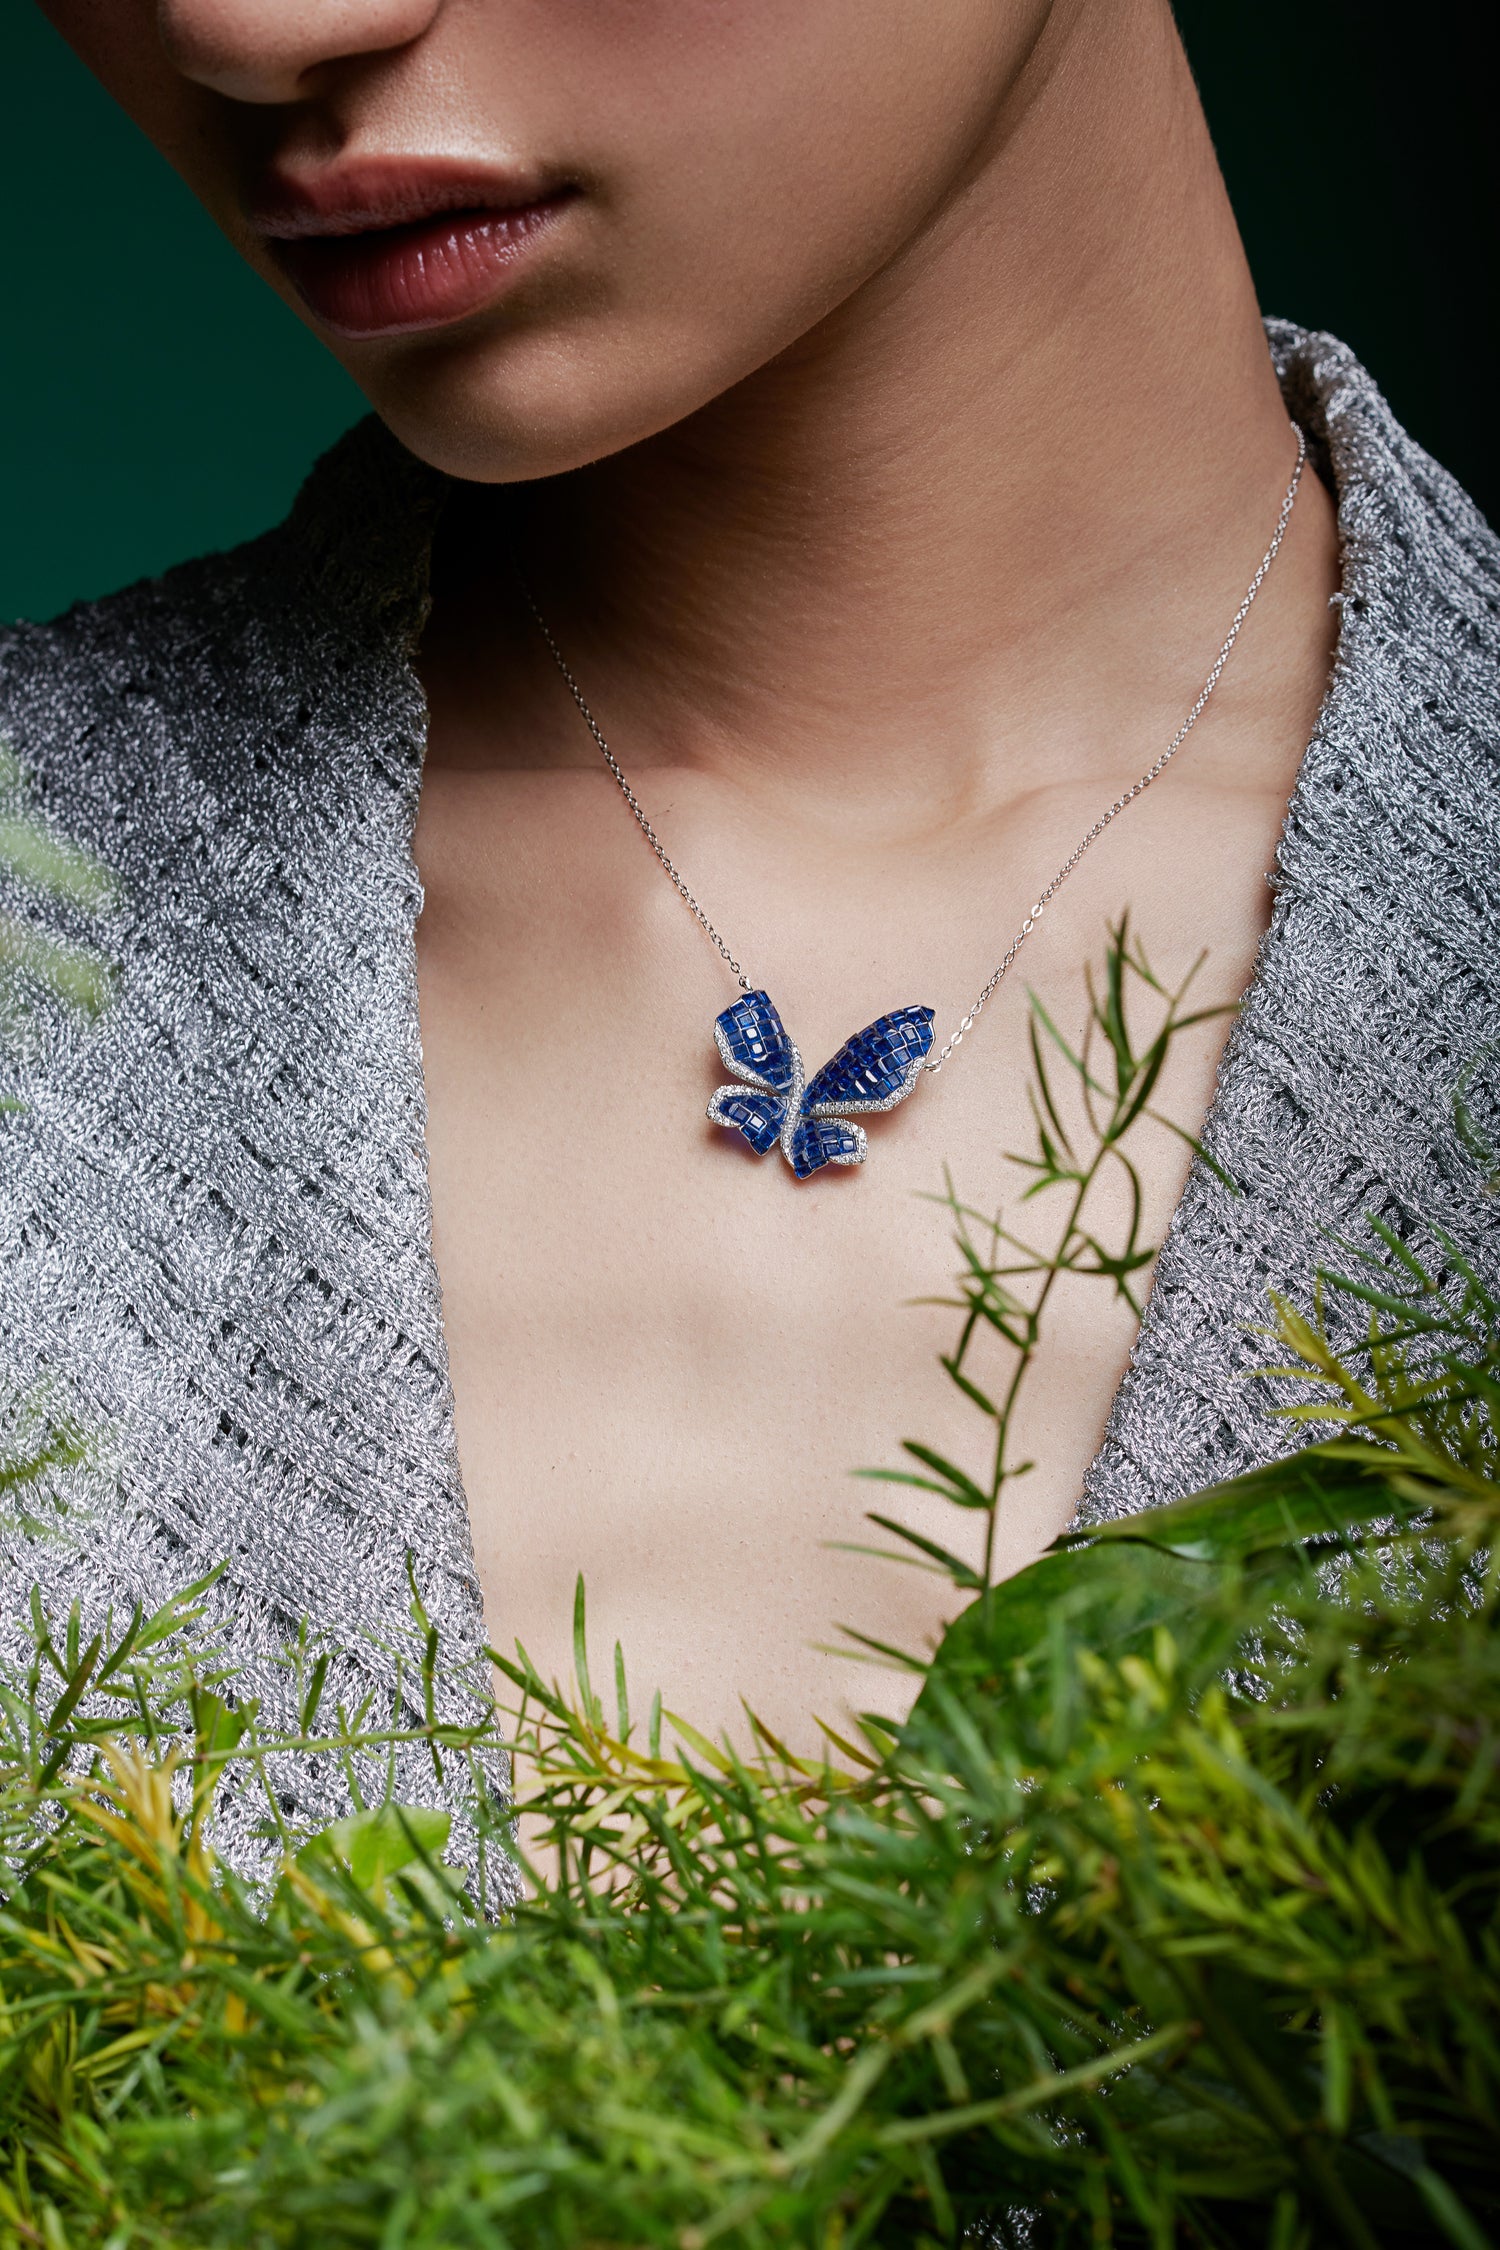 Mystical  Blue Sapphire Butterfly Pendant with Chain